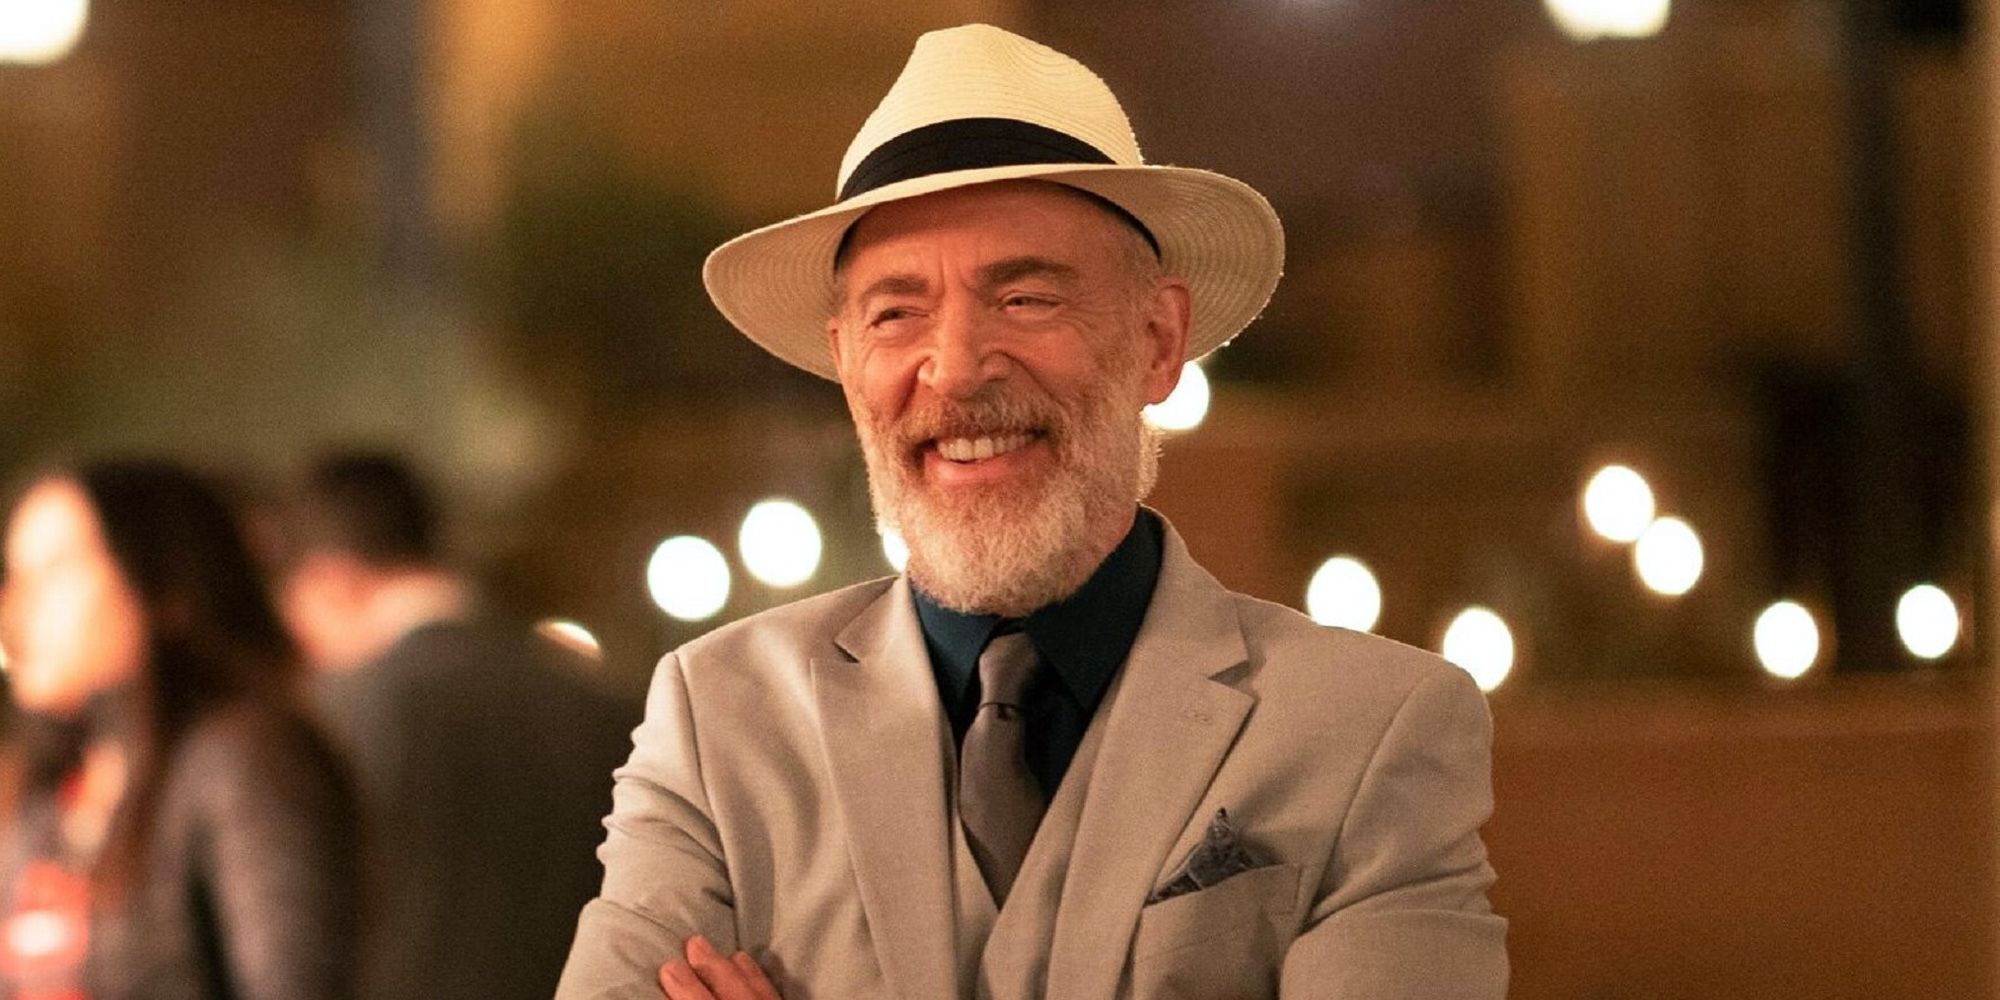 JK Simmons laughing in Palm Springs